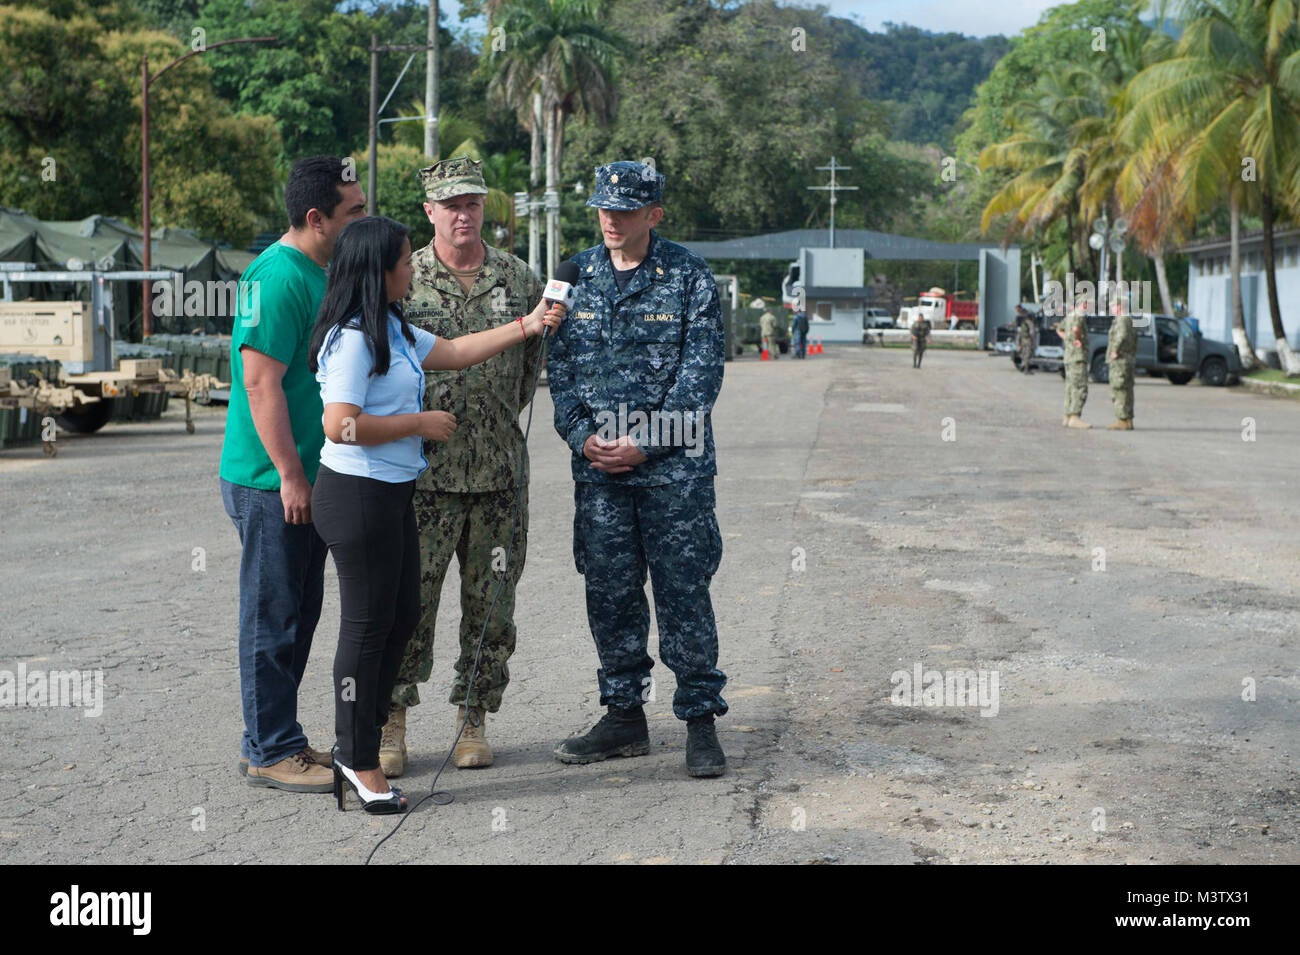 170201-N-YL073-001 (Feb. 1, 2017) PUERTO BARRIOS - Capt. Errin Armstrong, Mission Commander for Continuing Promise 2017 (CP-17), and Lt. Cmdr. Robert Lennon, CP-17's medical officer-in-charge, speak with a local cable news reporter in Puerto Barrios, Guatemala, during a CP-17 media event. CP-17 is a U.S. Southern Command-sponsored and U.S. Naval Forces Southern Command/U.S. 4th Fleet-conducted deployment to conduct civil-military operations including humanitarian assistance, training engagements, and medical, dental, and veterinary support in an effort to show U.S. support and commitment to Ce Stock Photo